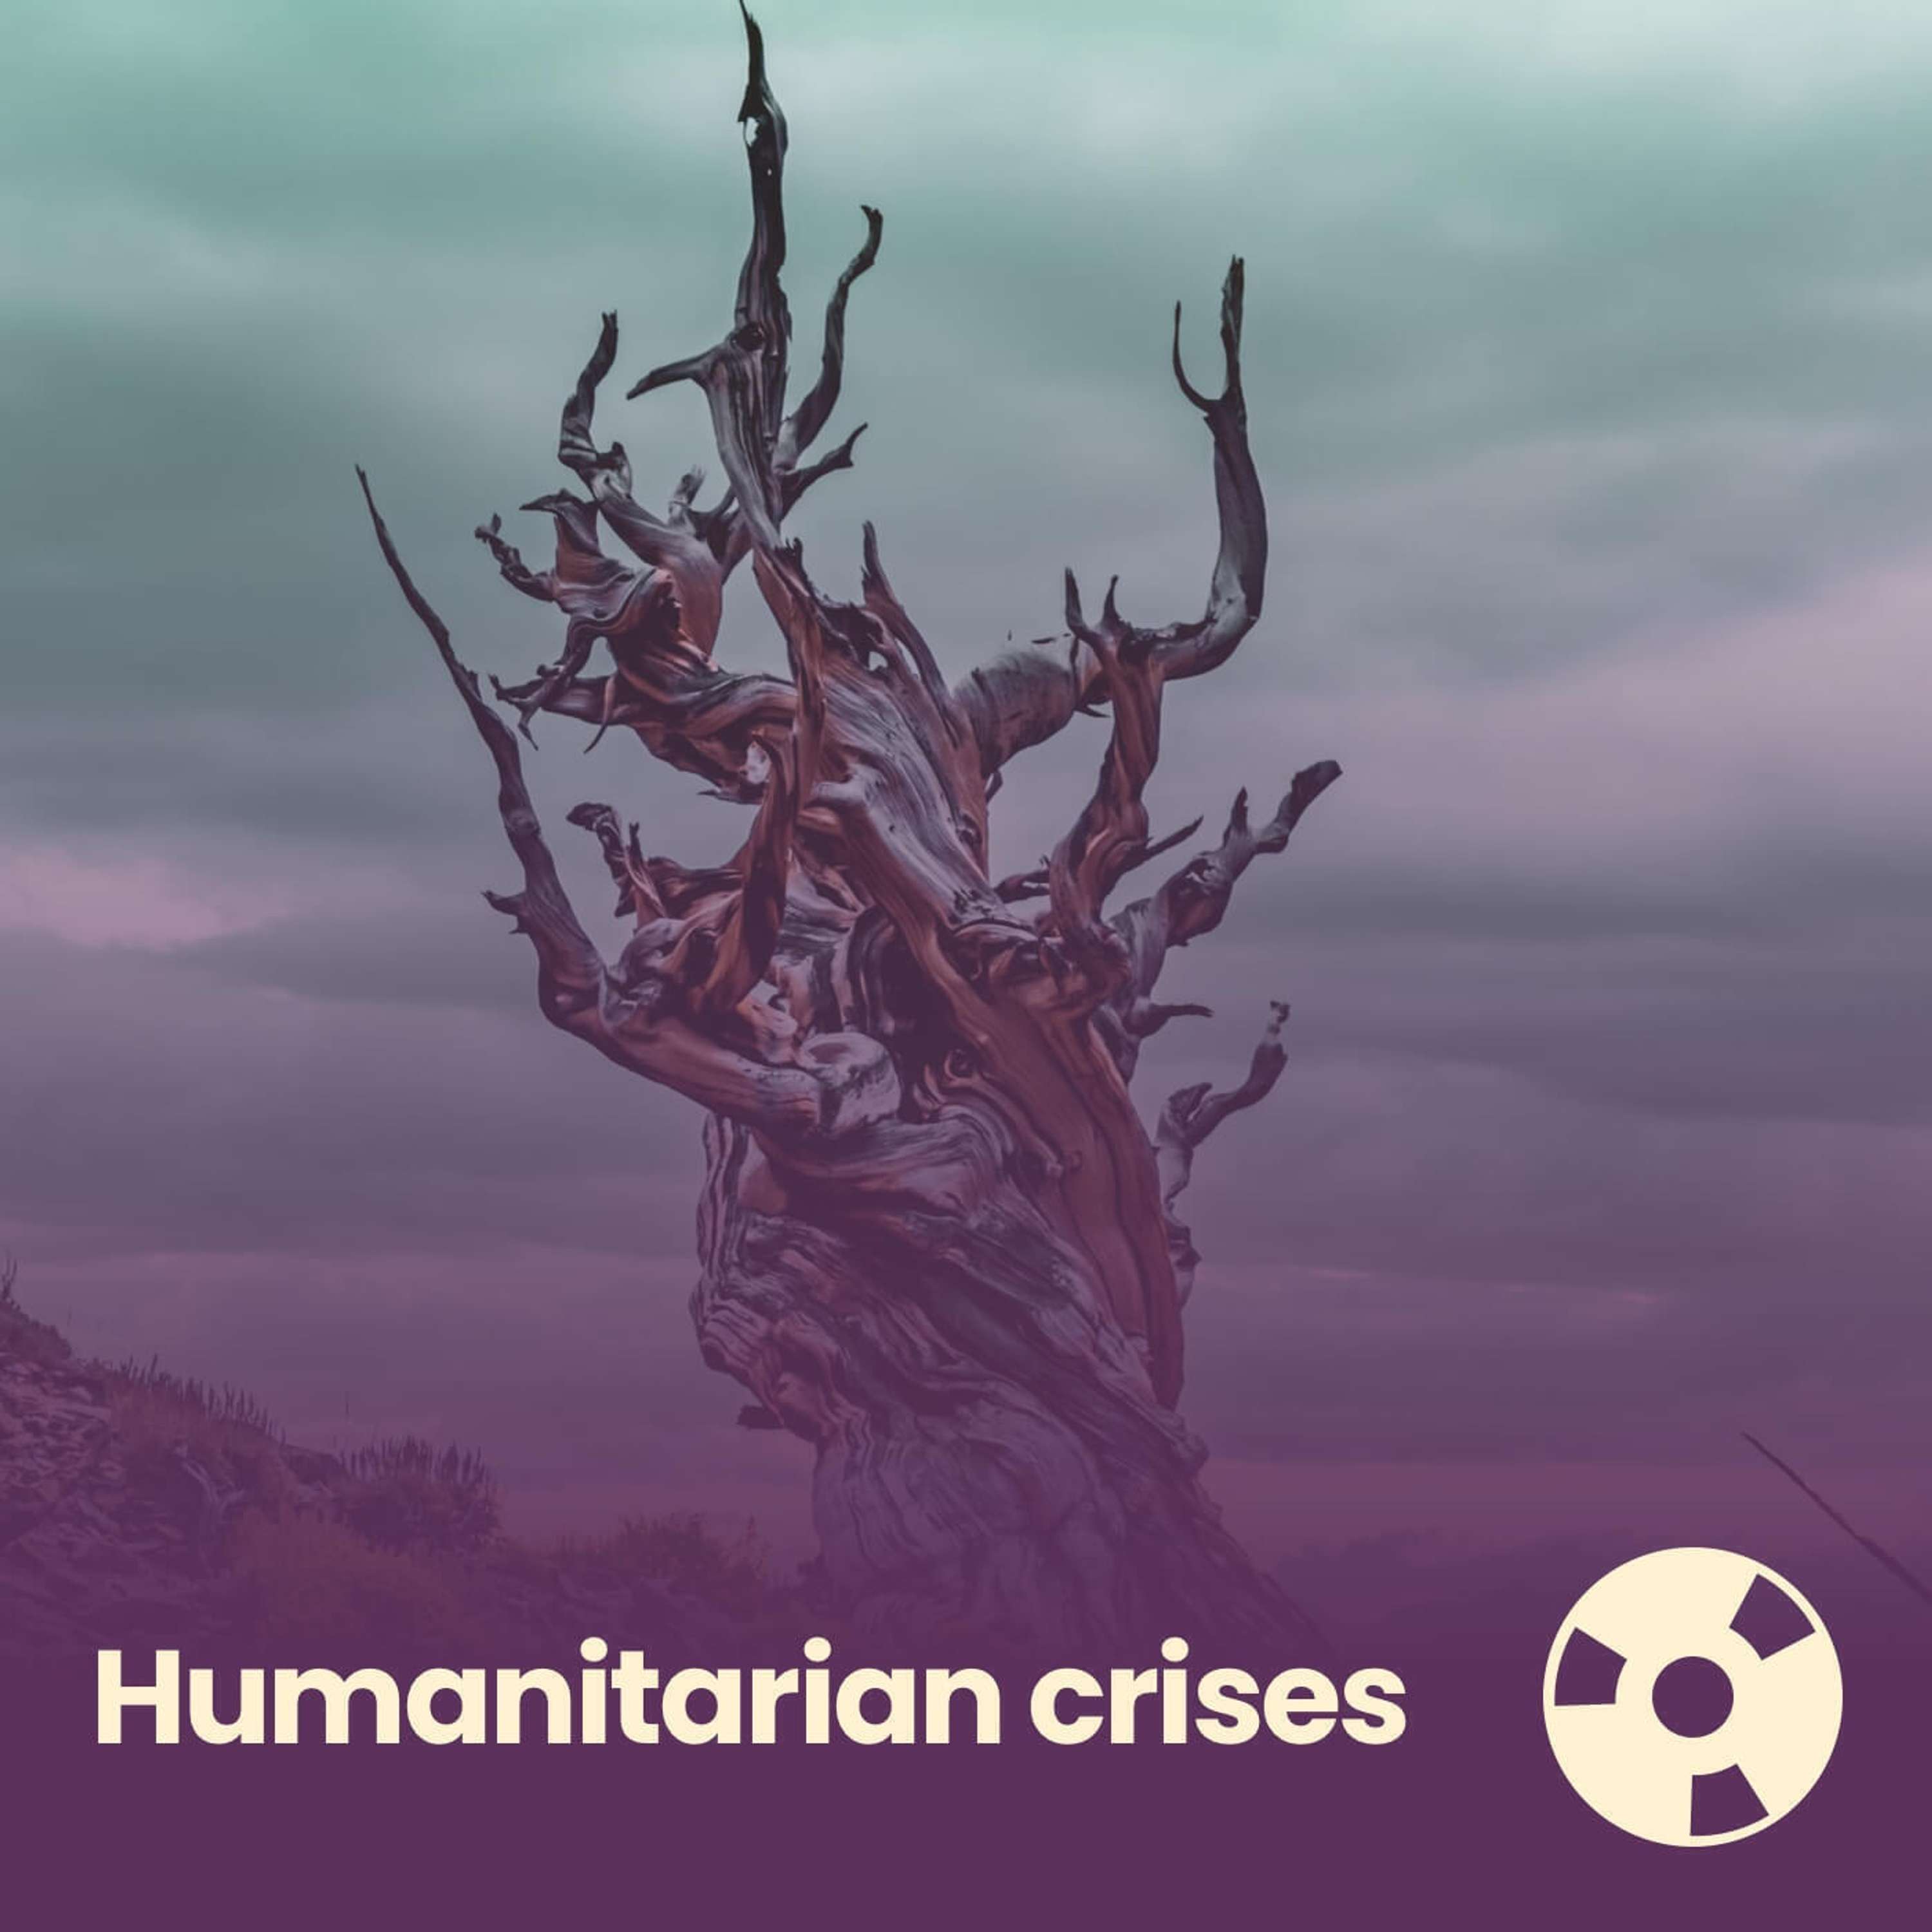 Using Your Podcast to Raise Awareness and Funds for Humanitarian Crises